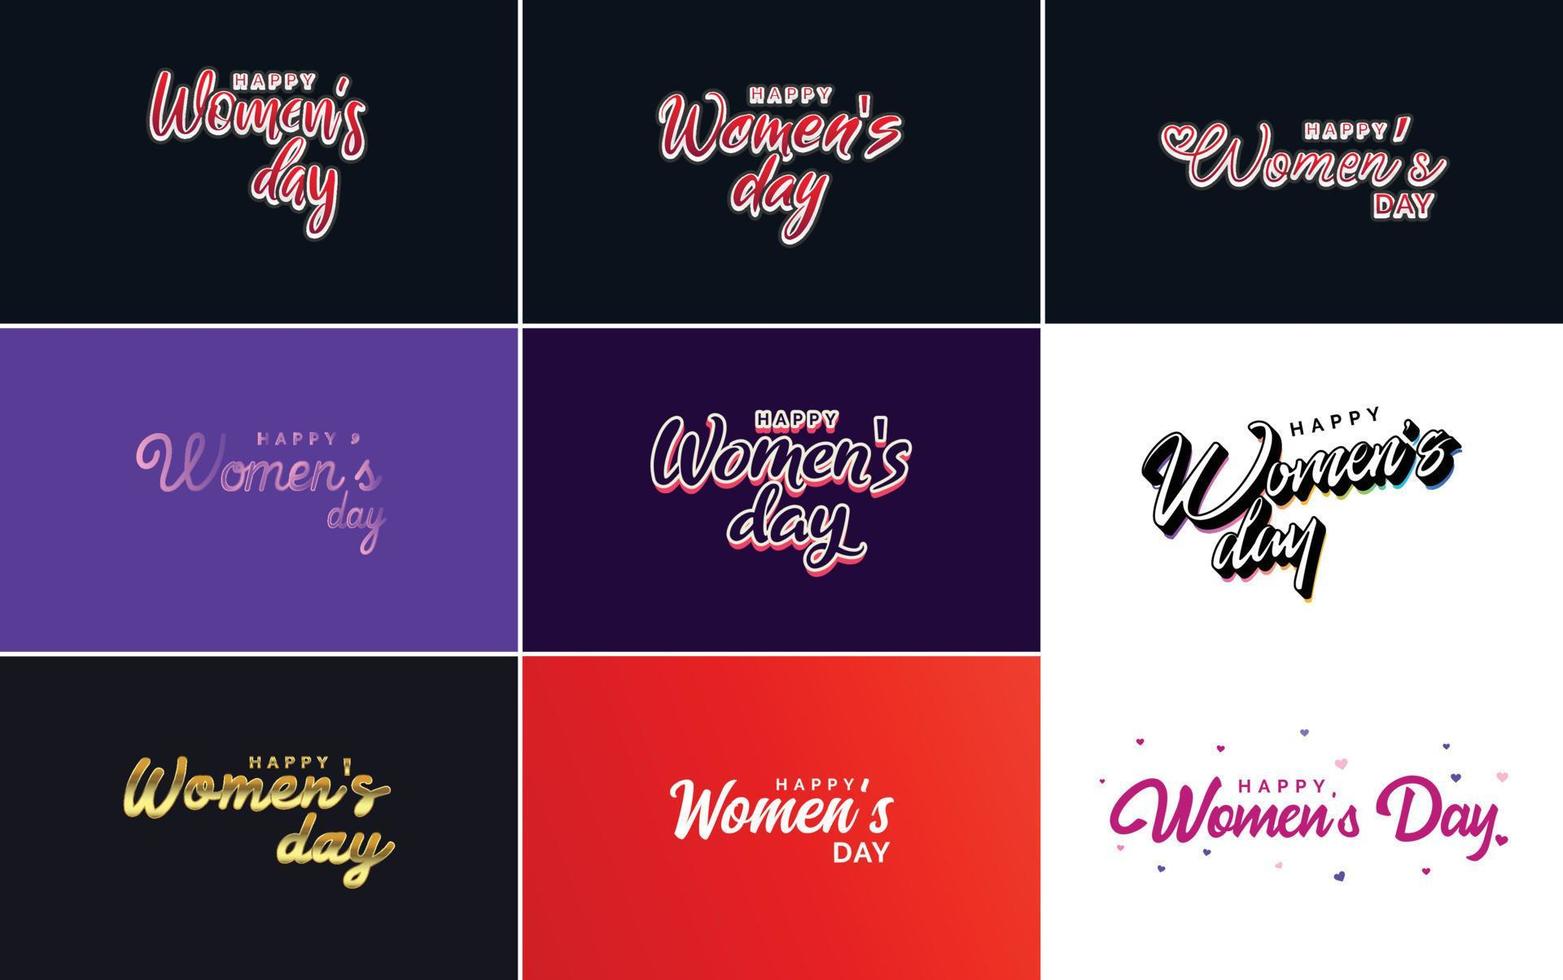 March 8 typographic design set with Happy Women's Day text vector